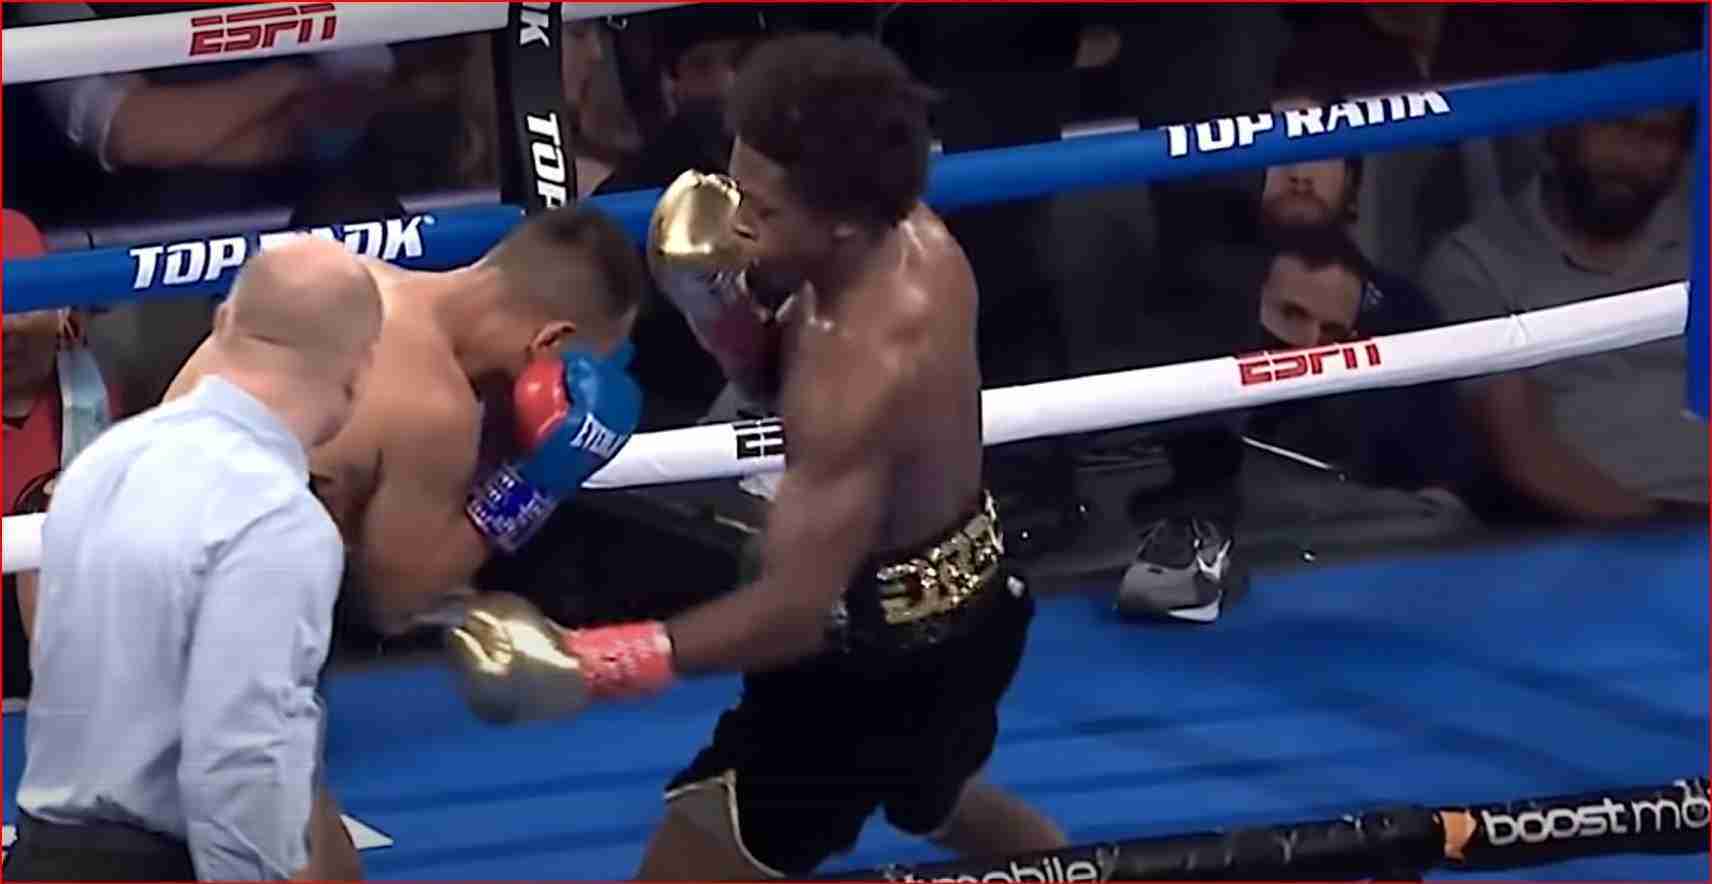 Watch: Knockout Of The Year 2021 Contender From USA Prospect